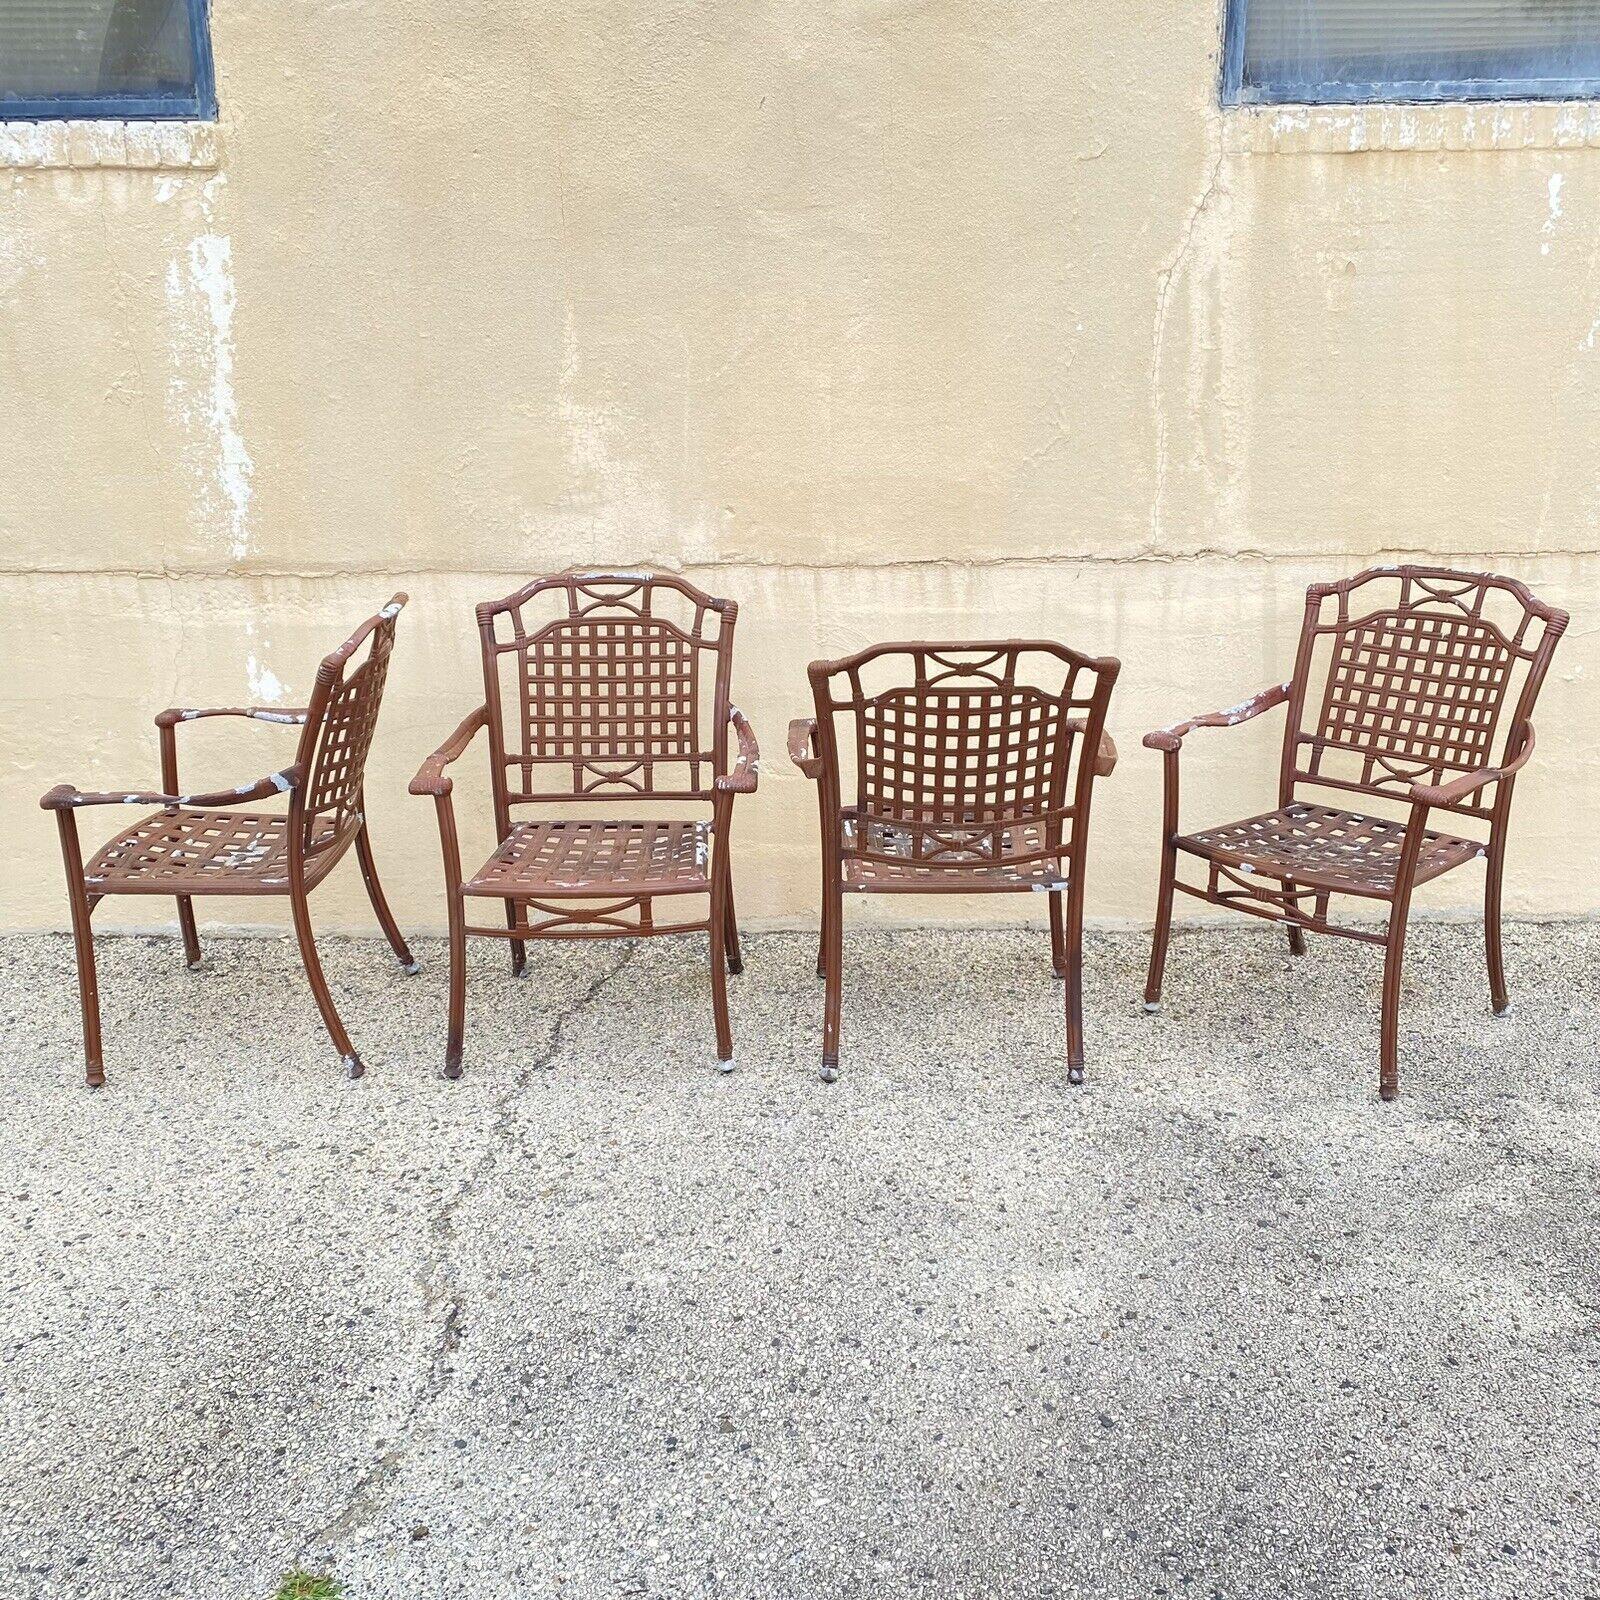 Hollywood Regency Cast Aluminum Basket Weave Lattice Rattan Patio Outdoor Chairs (B) - Set of 4. Item features stacking frames, cast aluminum construction, great style and form. Circa Late 20th - 21st Century. Measurements: 36.5